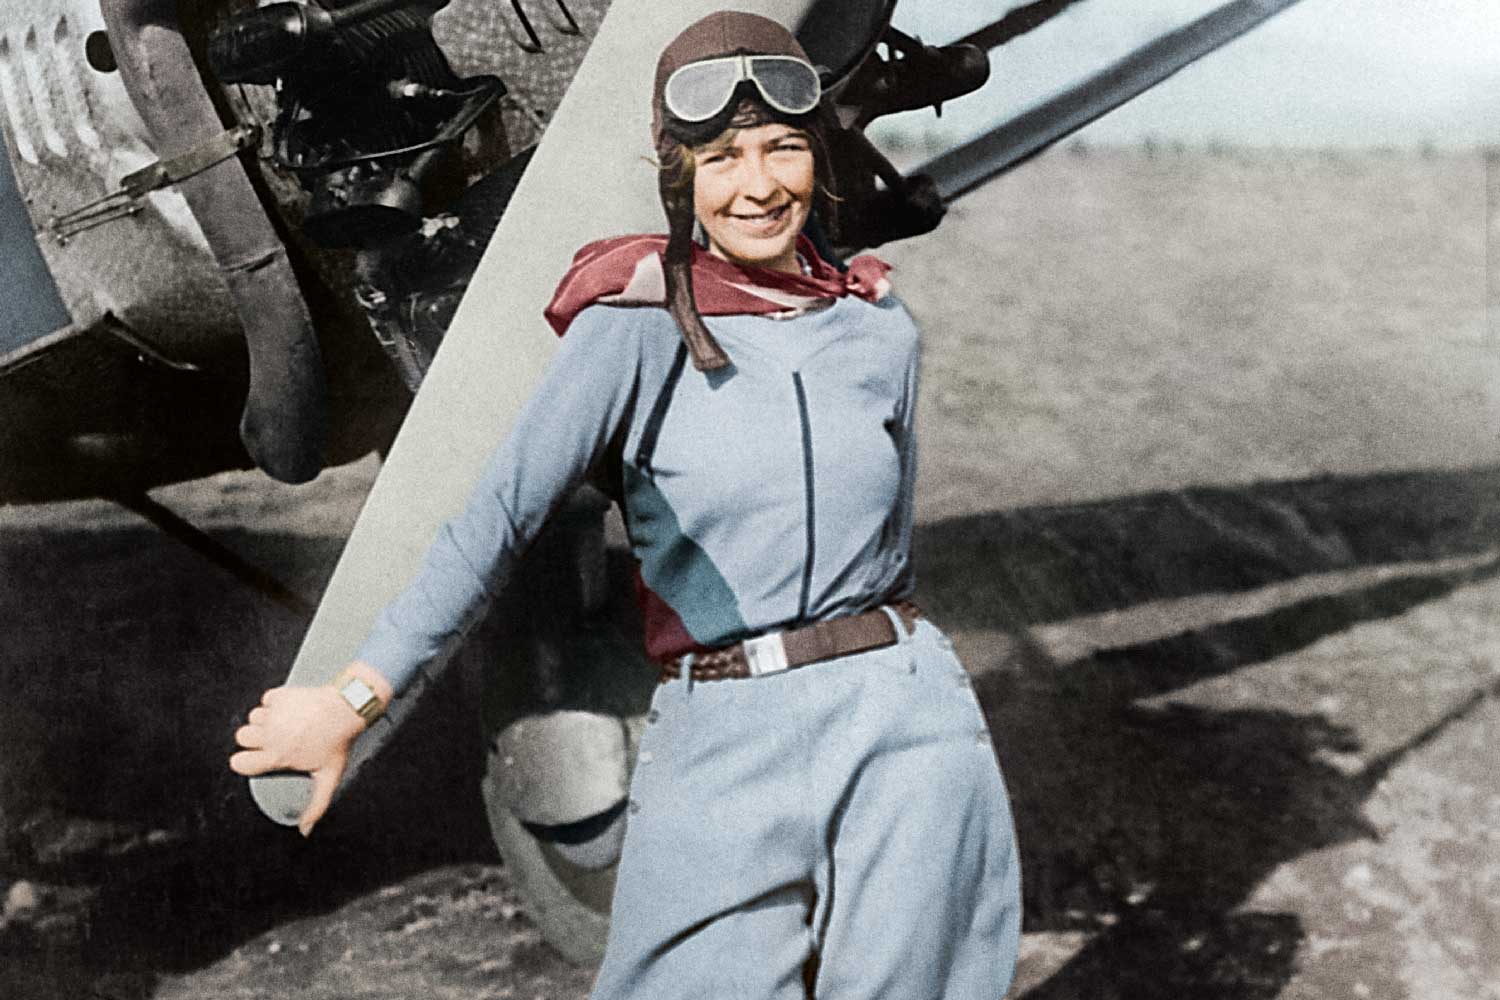 Elinor Smith was the youngest licensed pilot in the world at age 16, setting multiple solo endurance, speed, and altitude records while relying on a trusted Longines watch.